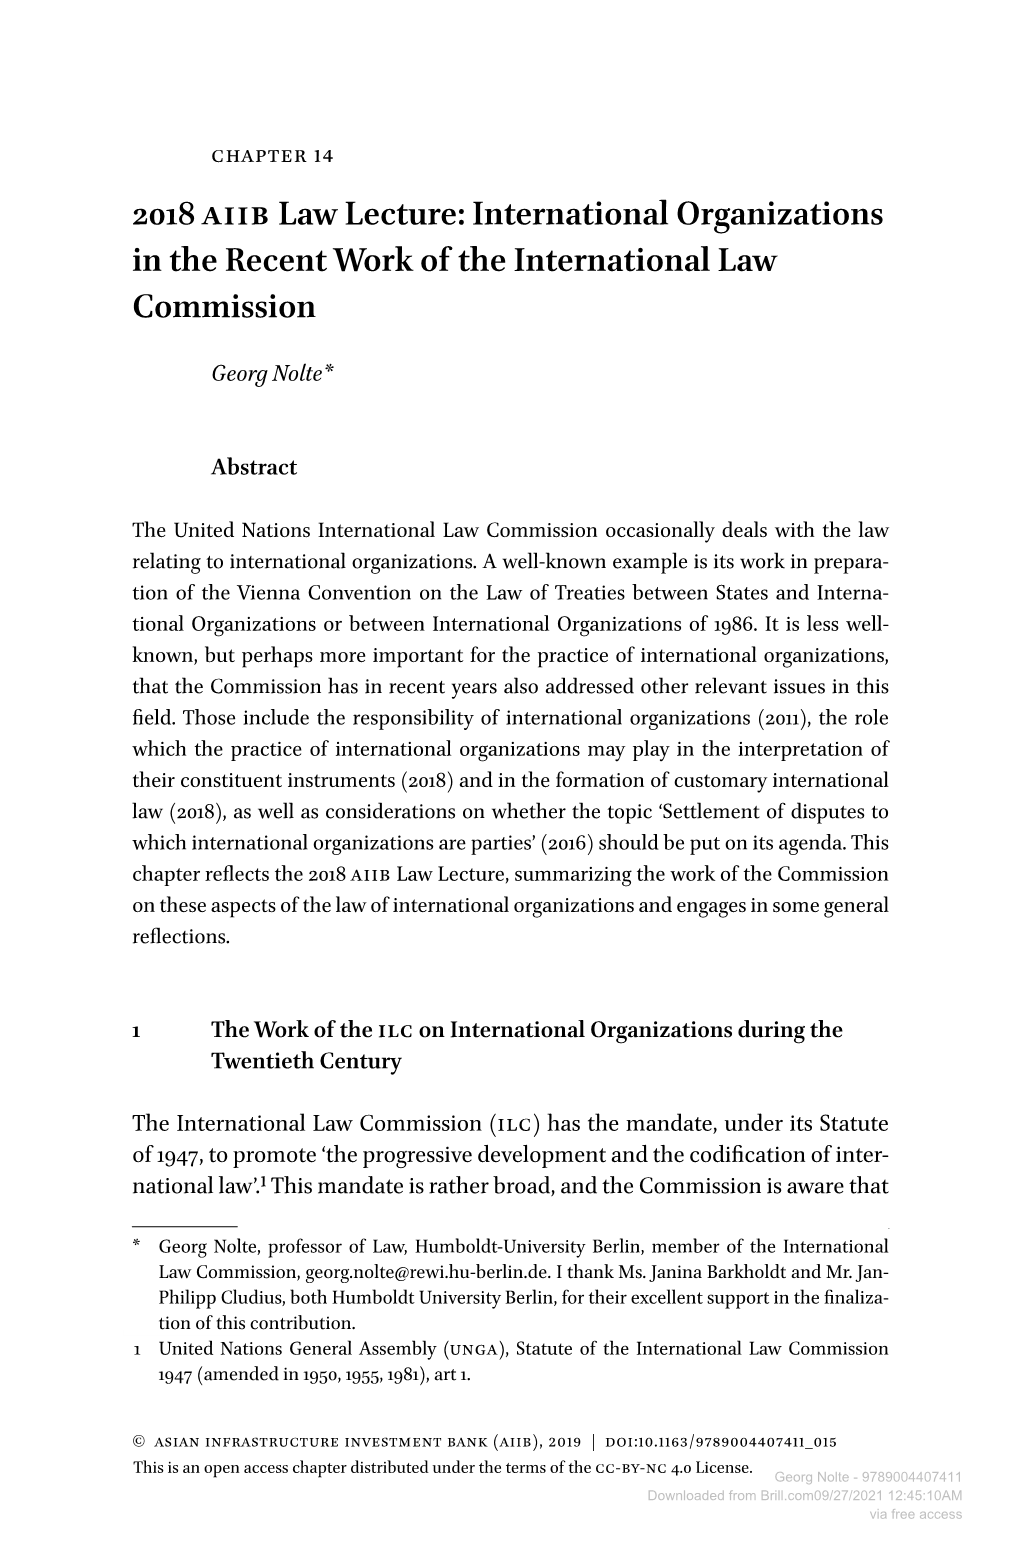 International Organizations in the Recent Work of the International Law Commission